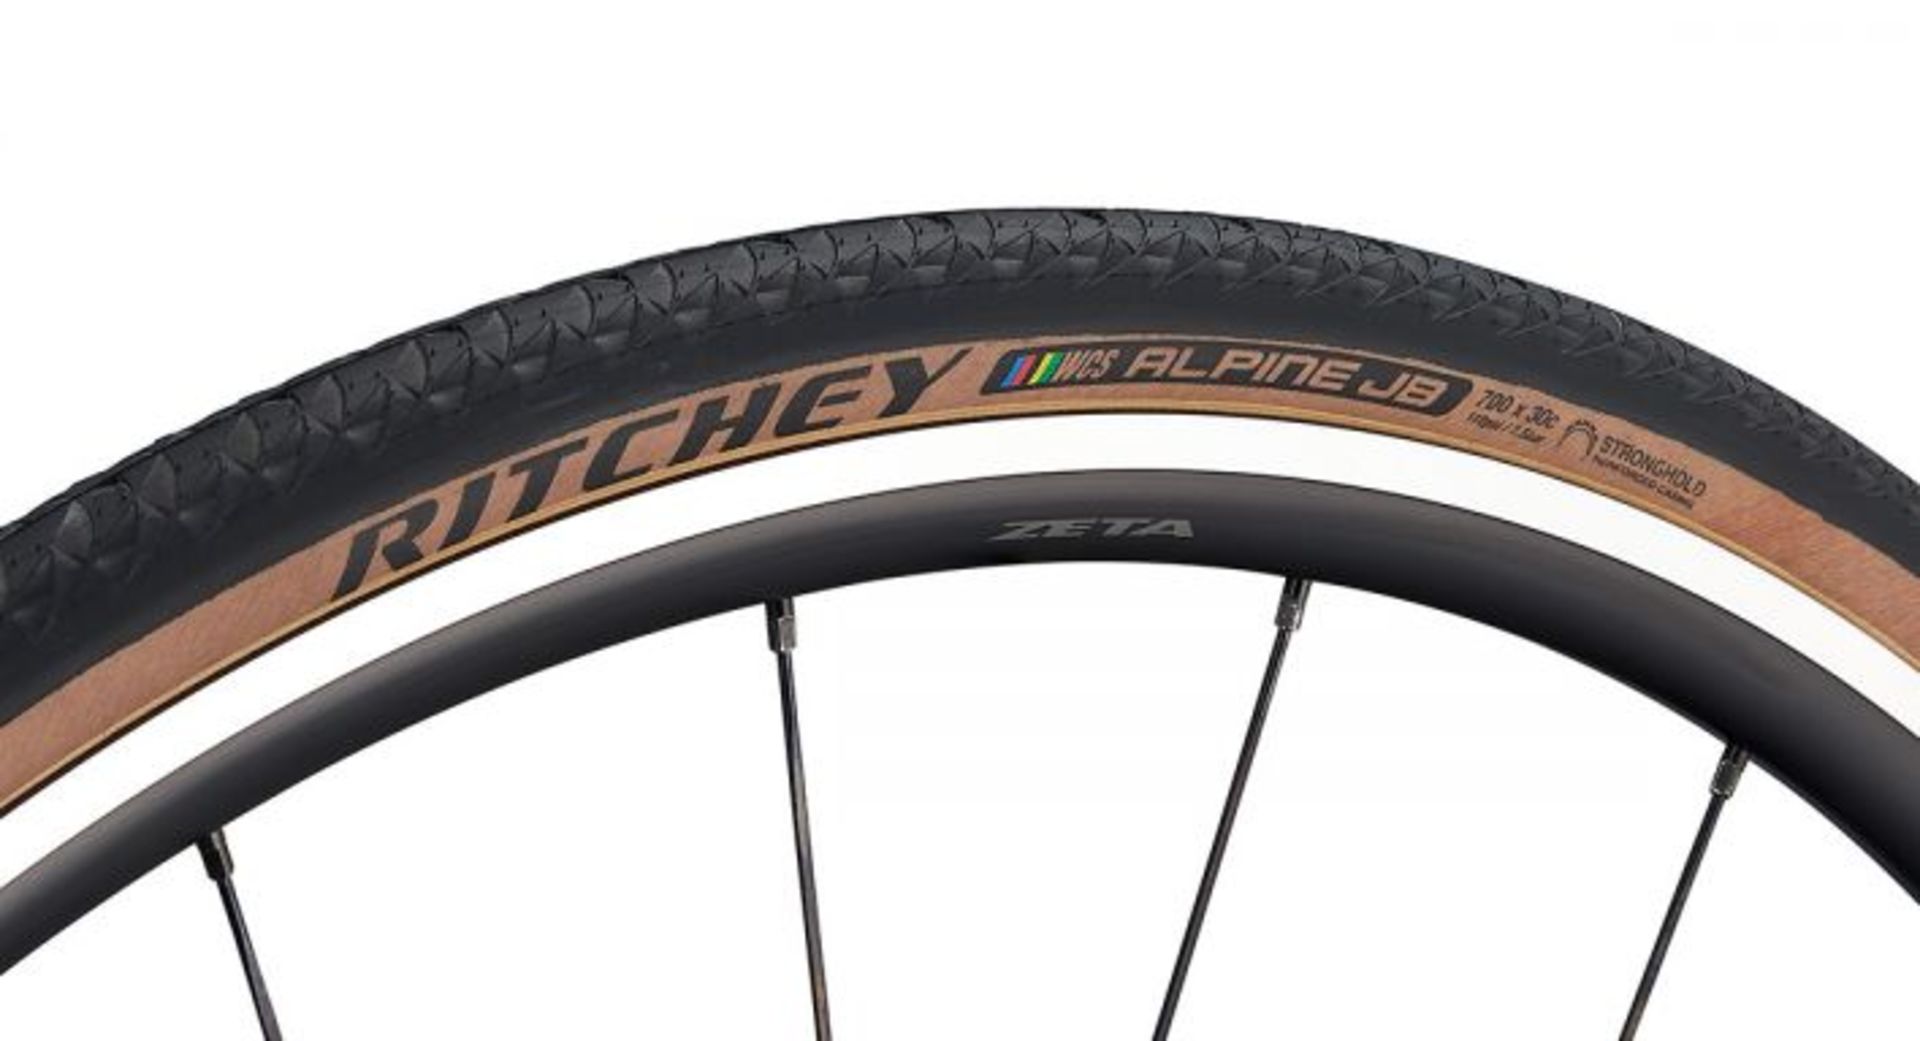 Ritchey WCS Alpine JB Stronghold TLR Gravelband Skinwall